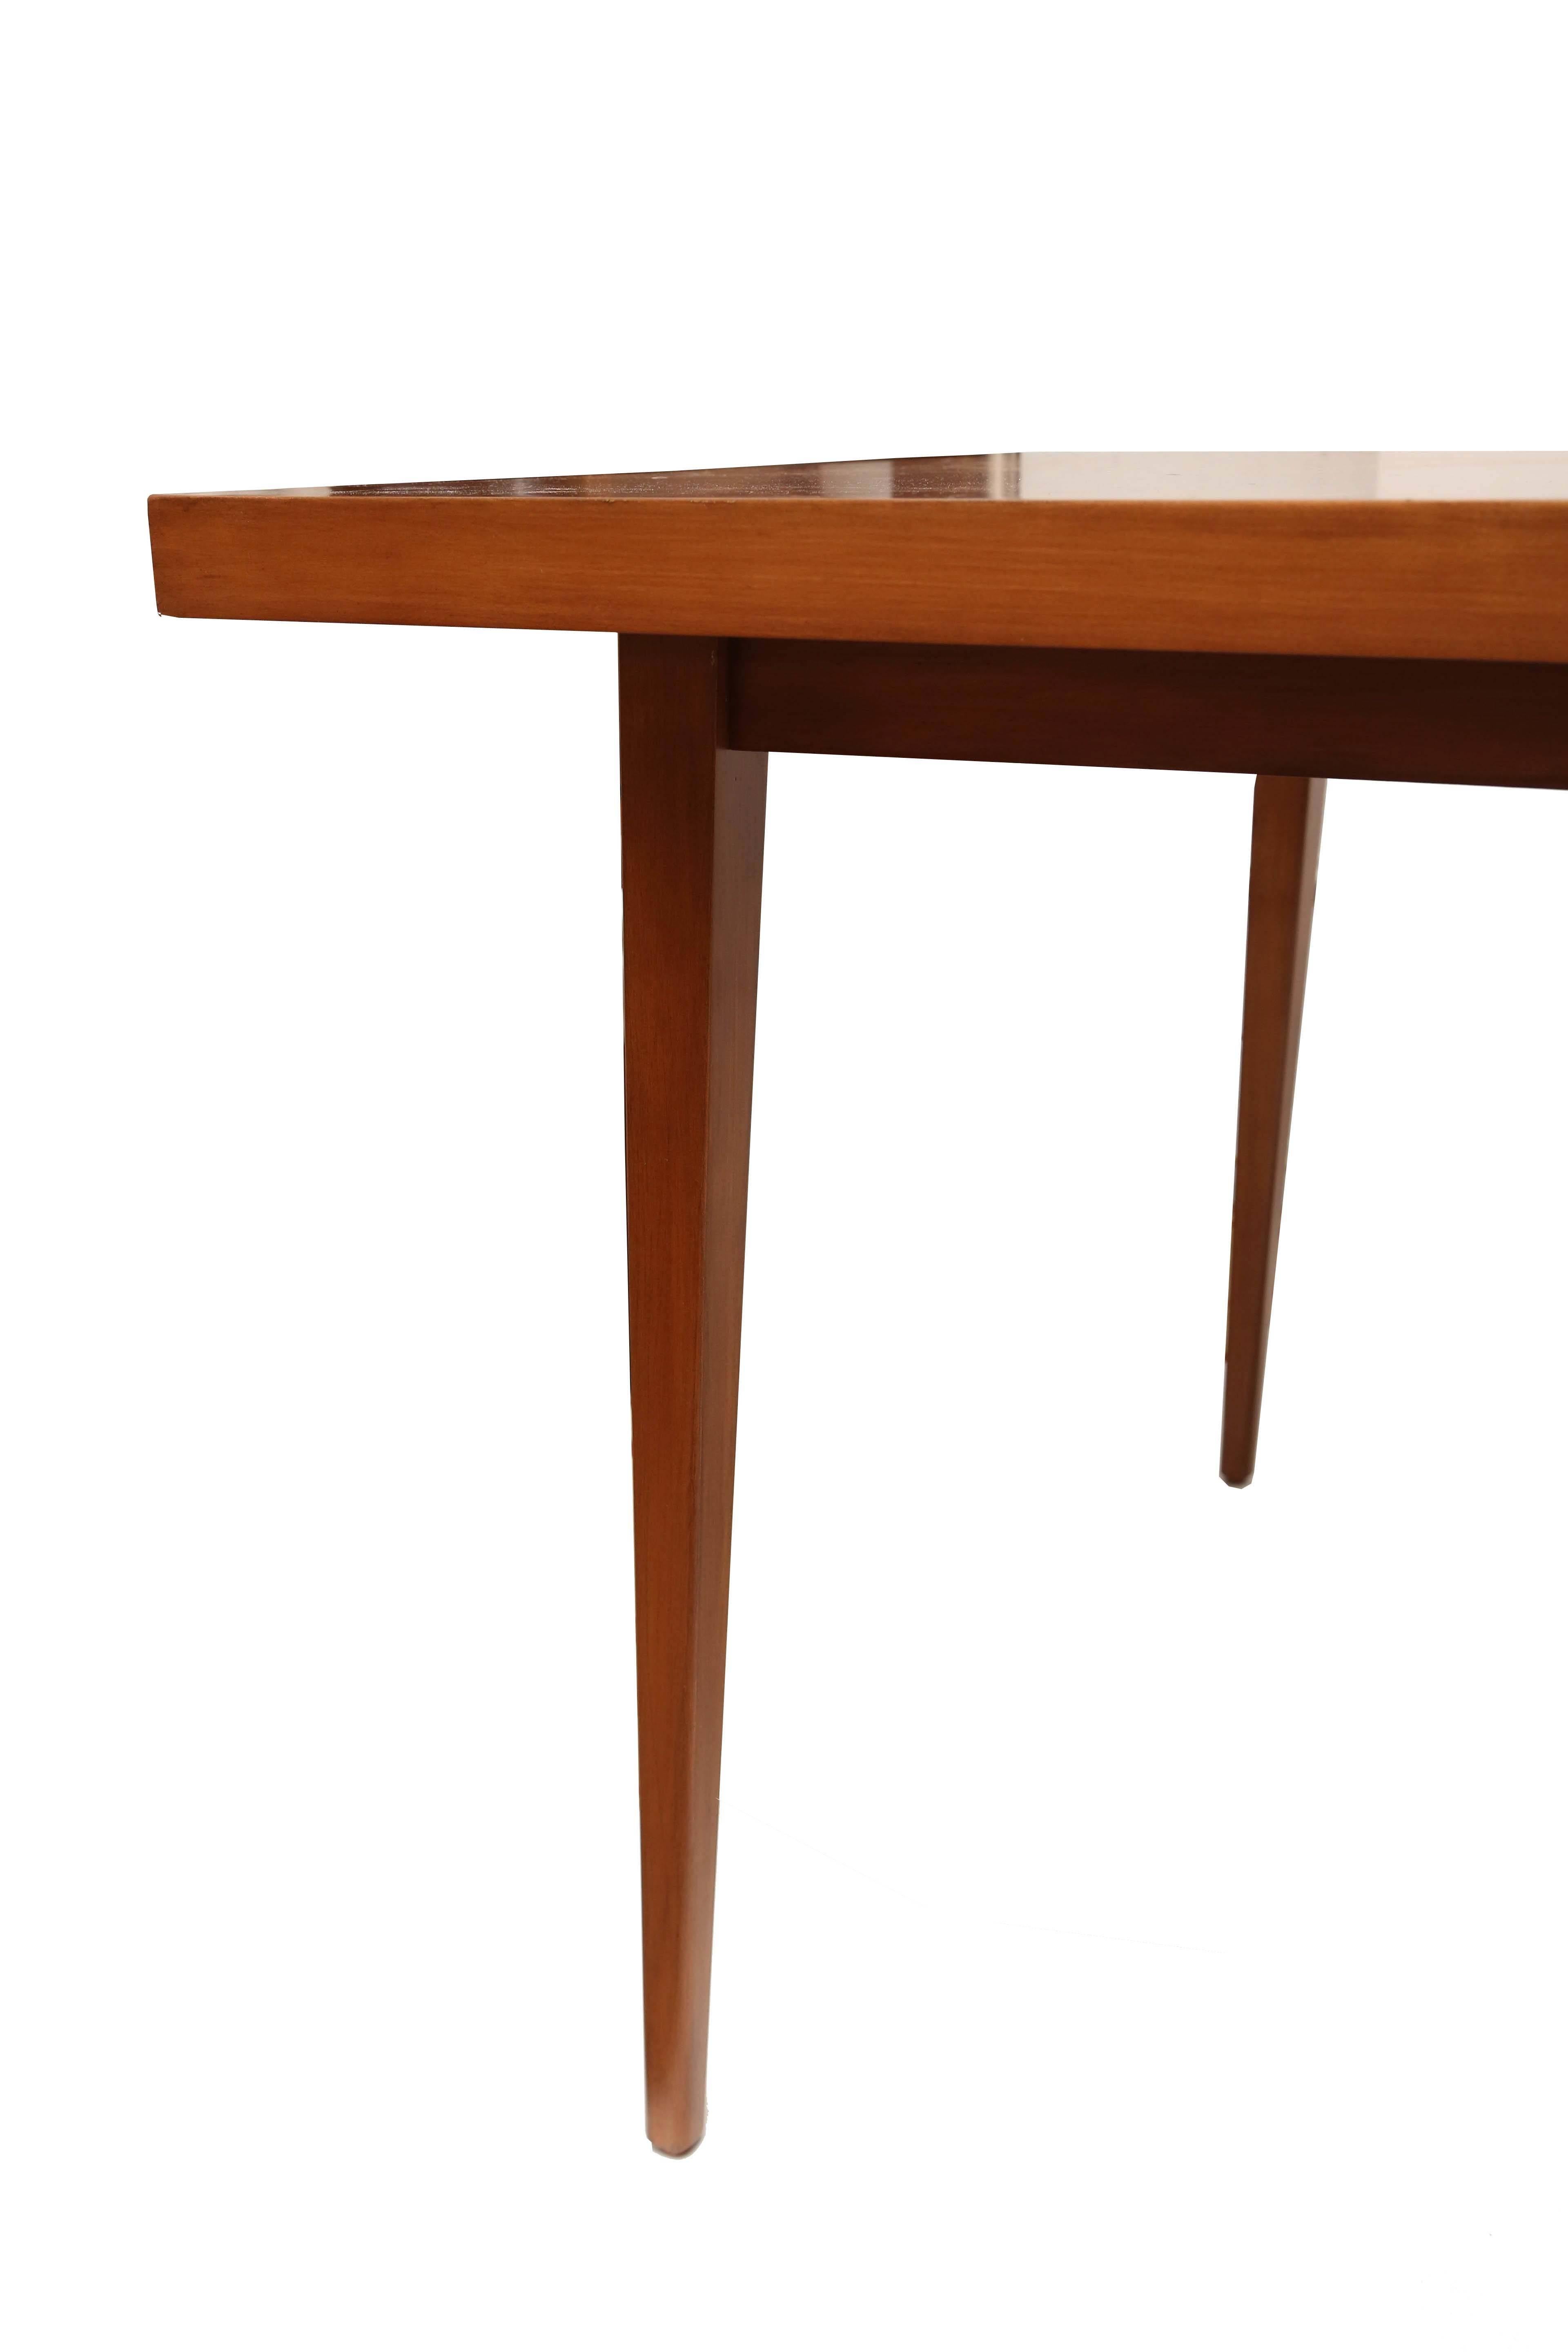 Wood Paul McCobb Dining Table with Two Leaves, USA, 1960s For Sale